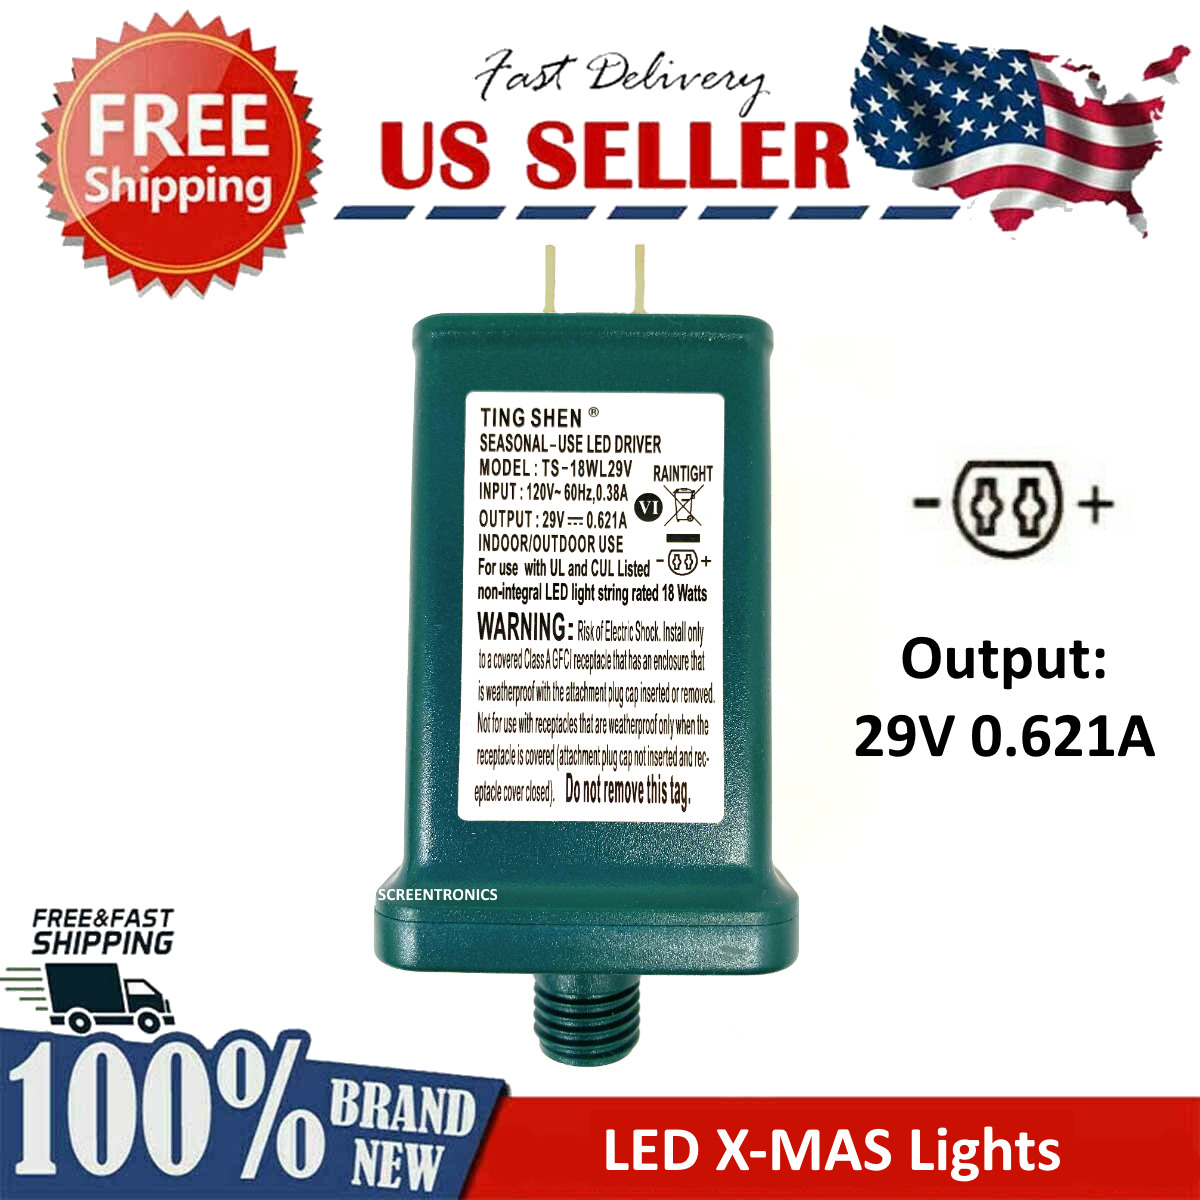 Replacement Power Supply for LED Xmas Tree Lights DC 29V 0.621A - TS-18WL29V